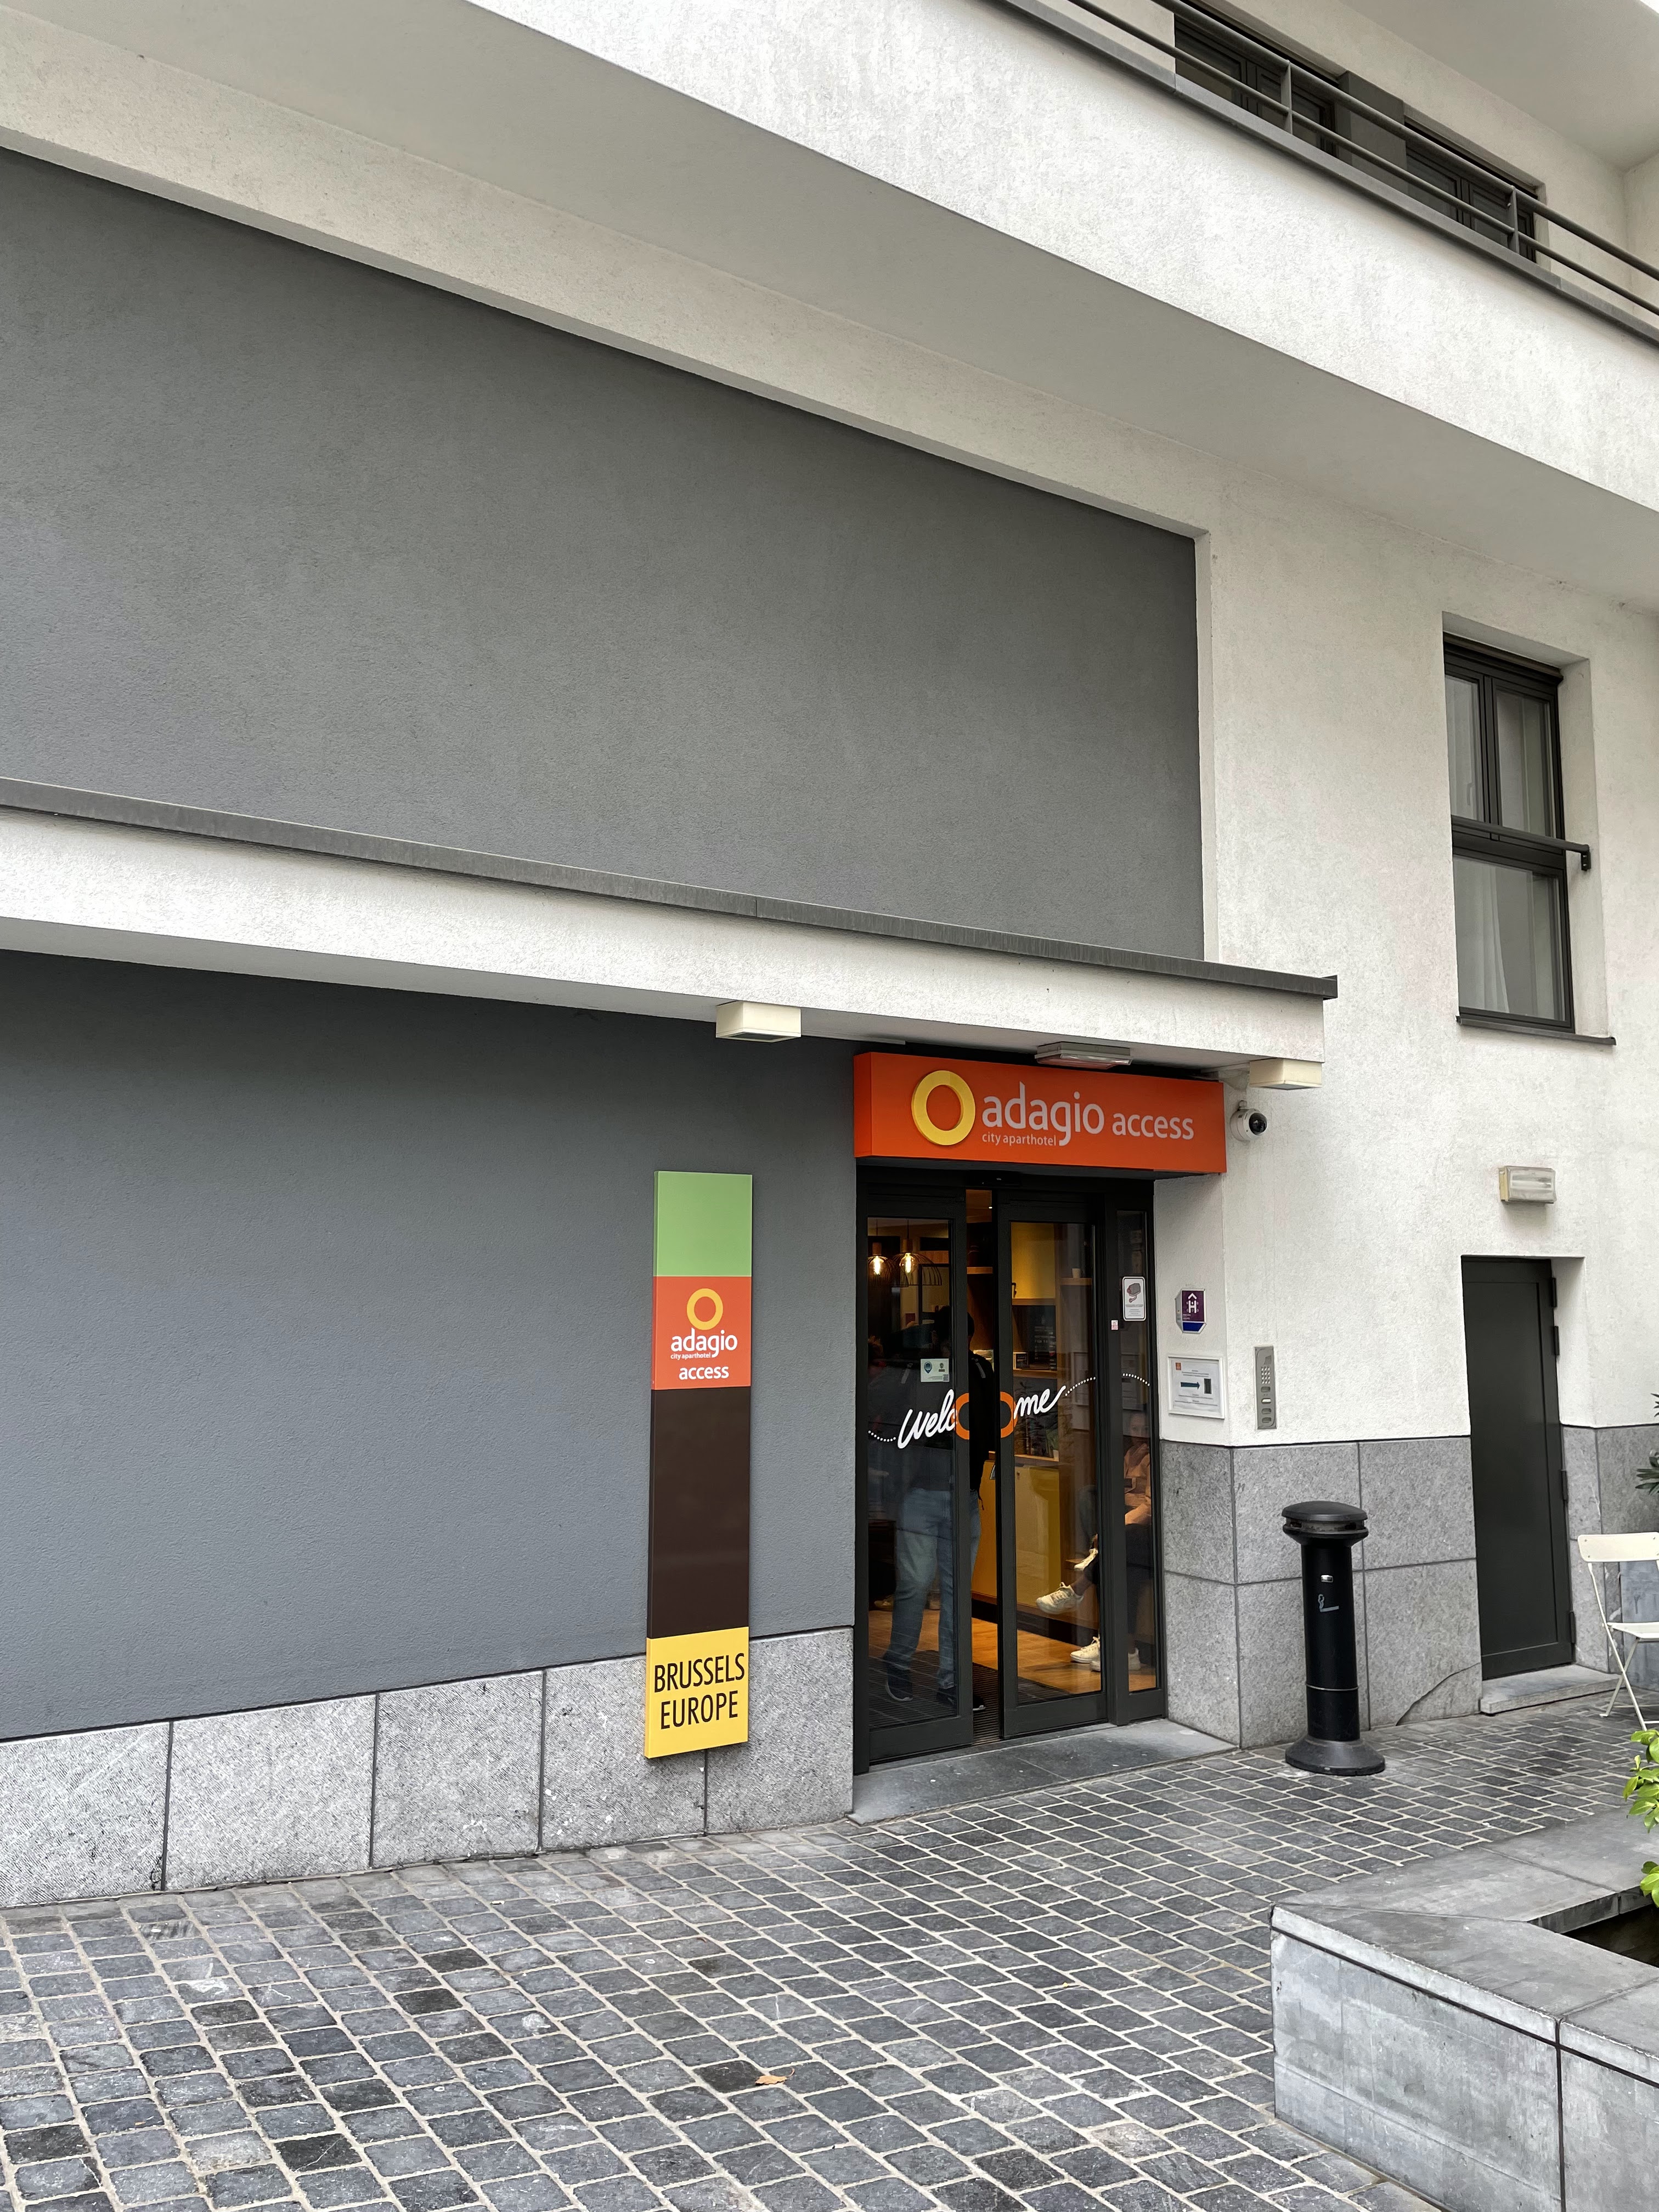 Picture of a place: Aparthotel Adagio access Brussels Europe